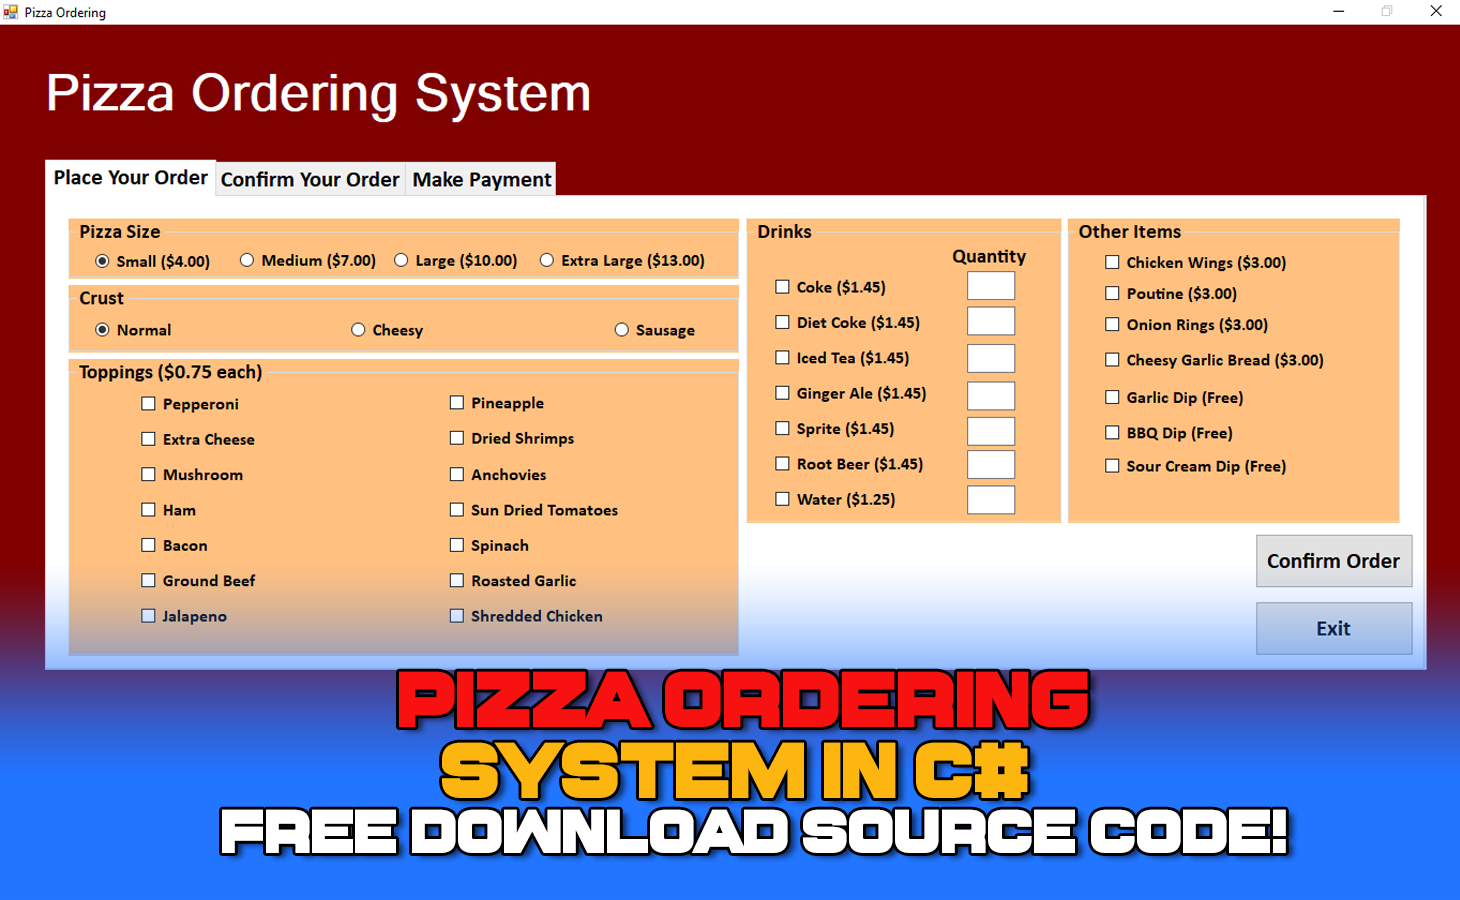 Pizza Ordering System in C#